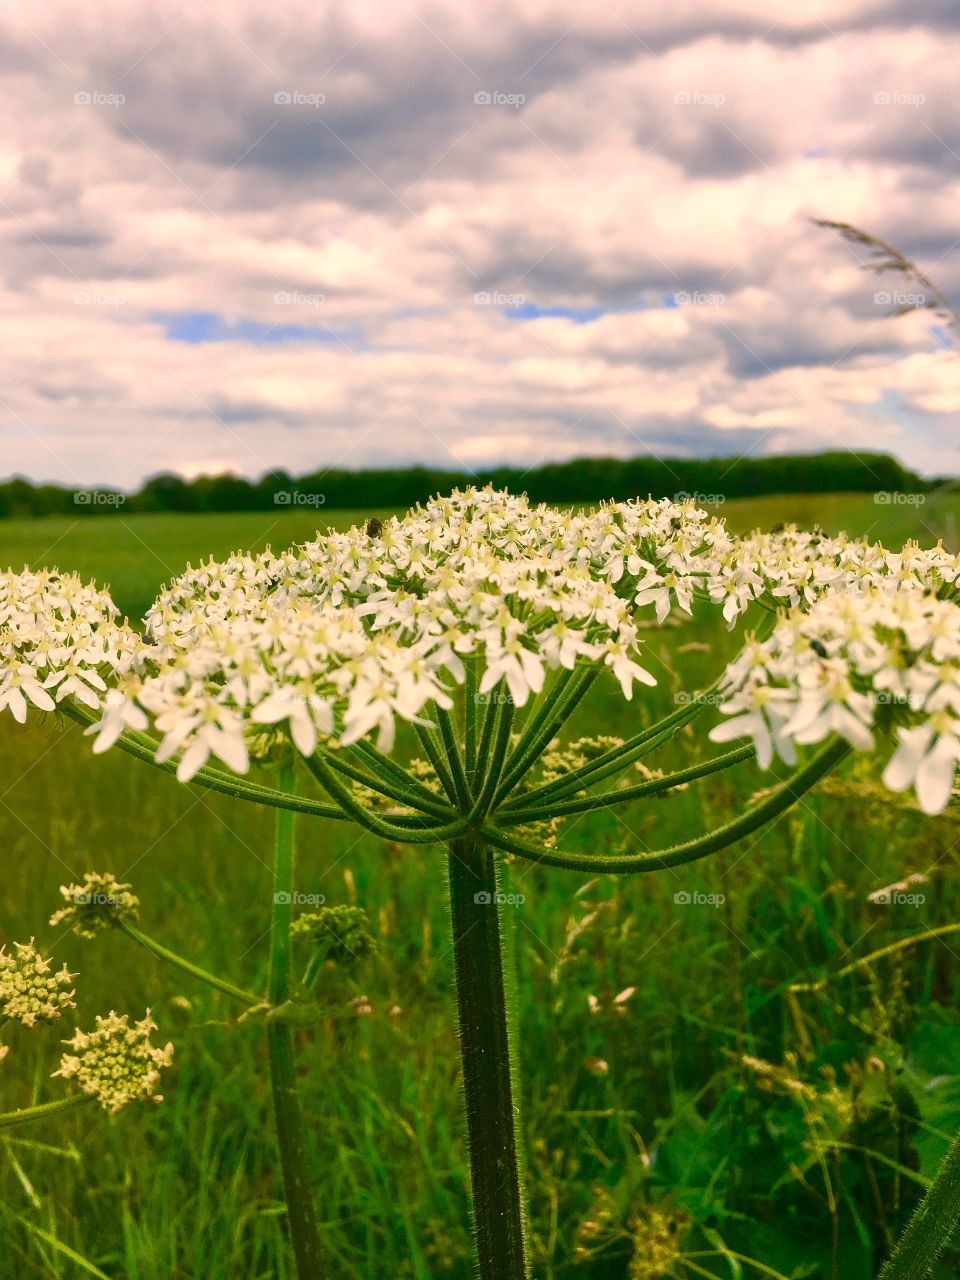 Cow parsley so common yet beautiful 